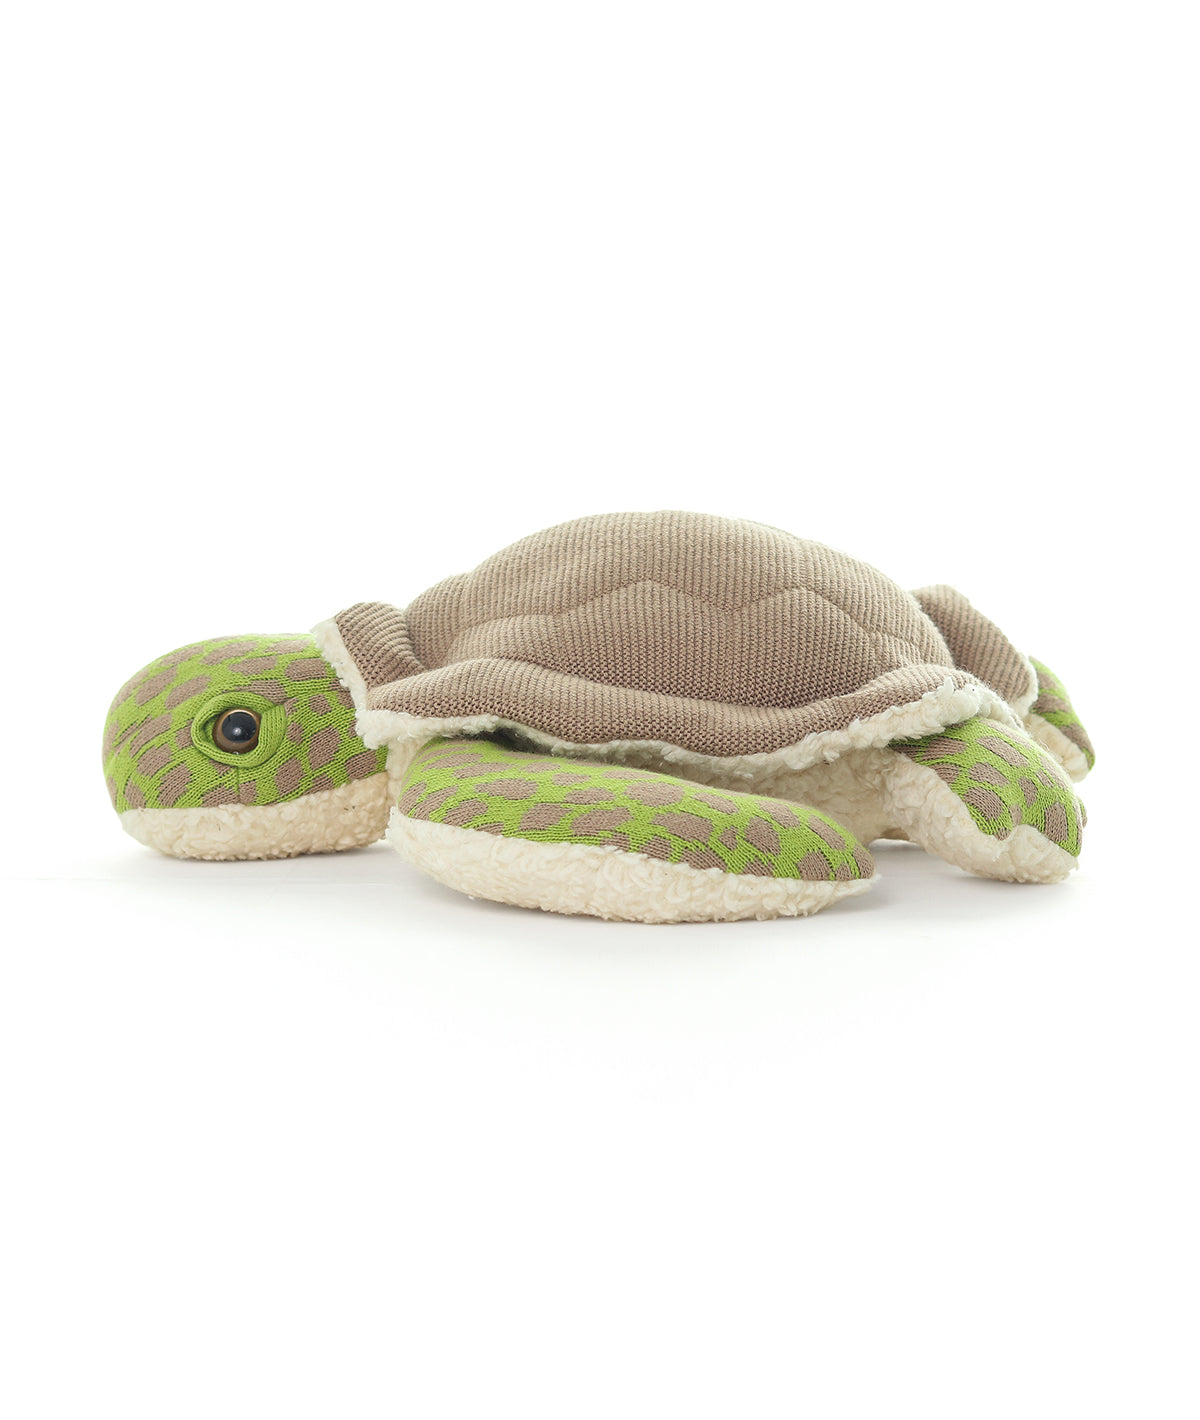 Shelly Tortoise Cotton Knitted Stuffed Soft Toy (Dove Beige & Medium Green)